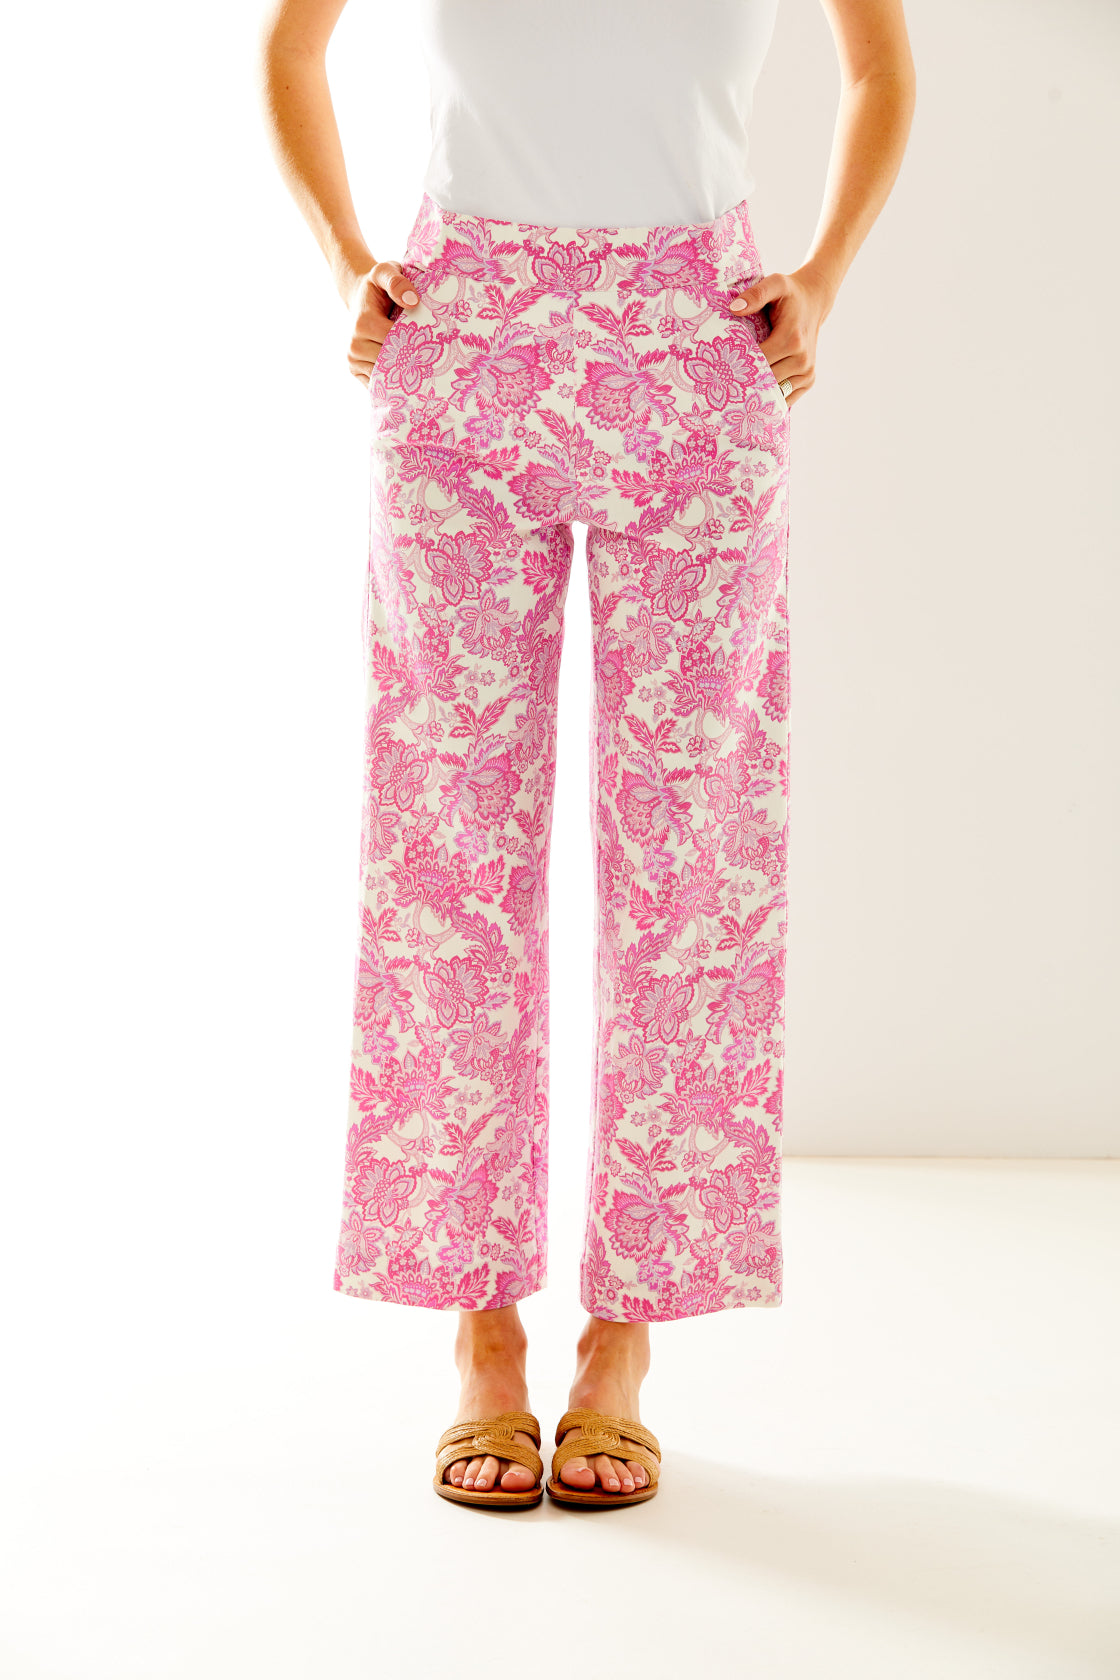 Woman in pink and white printed pant